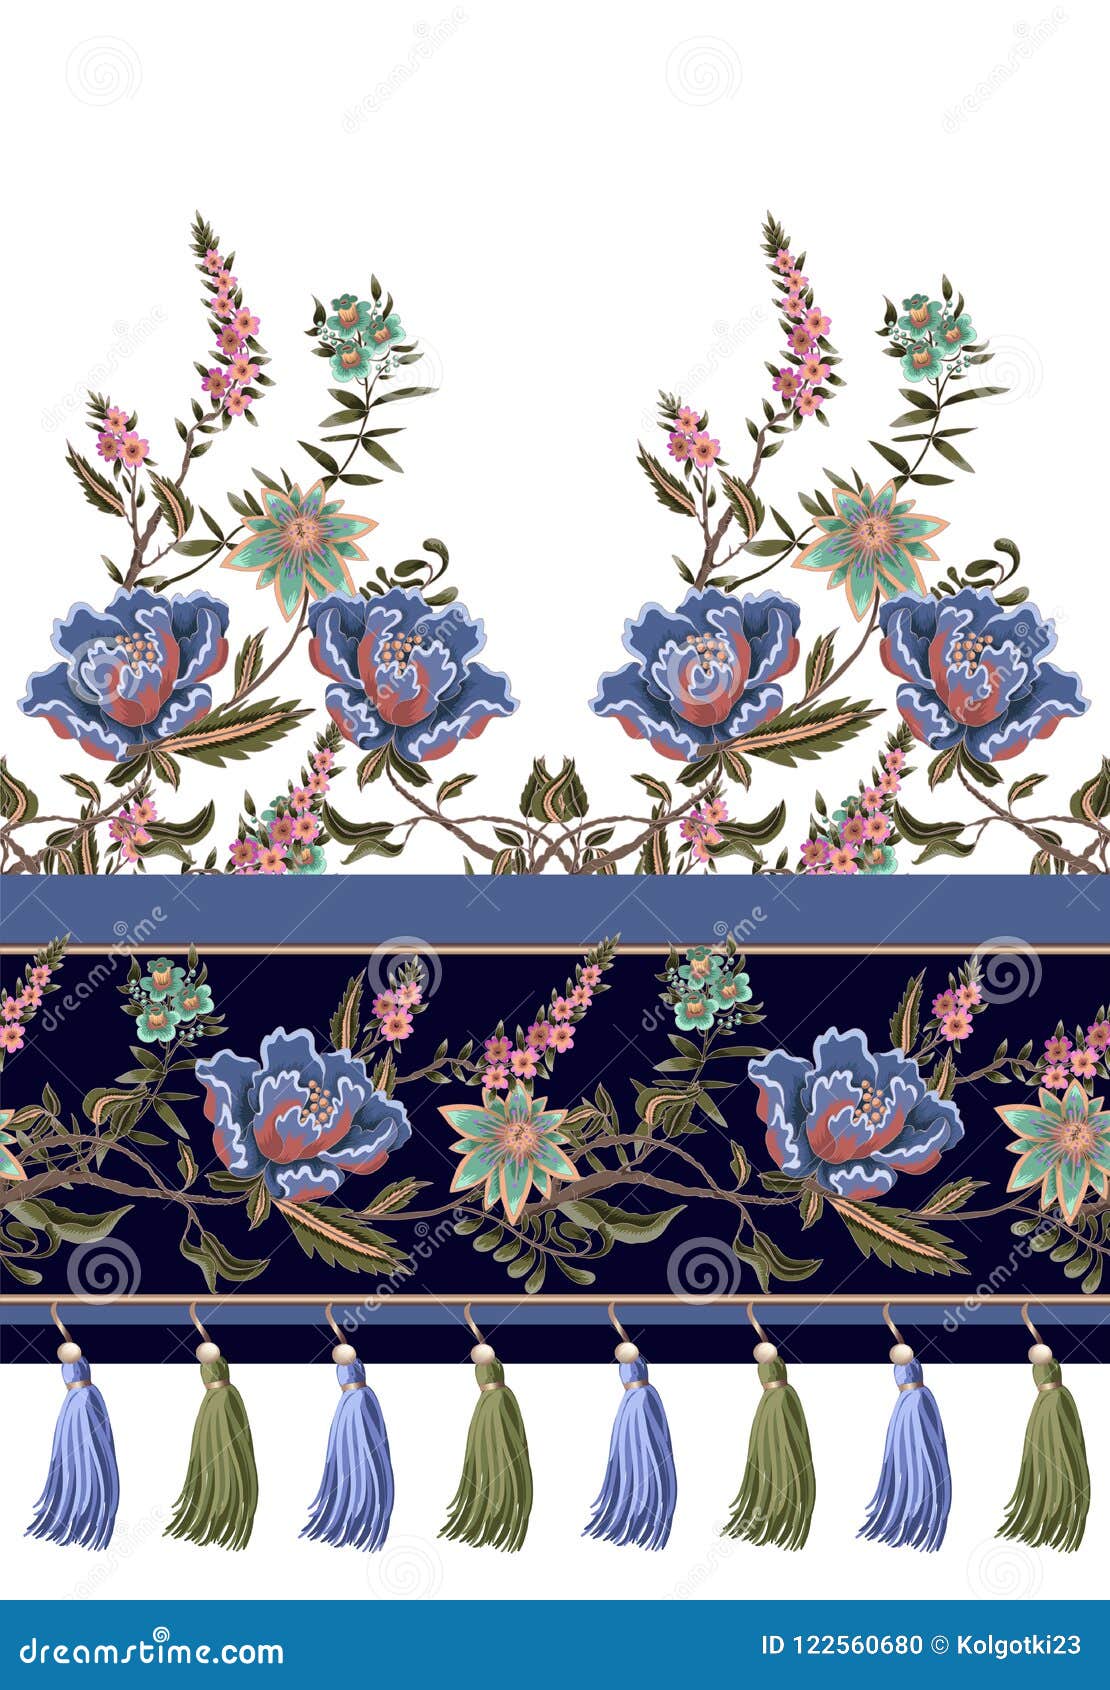 seamless border with indian ethnic ornament and fringes. folk flowers and leaves for print or embroidery.  .